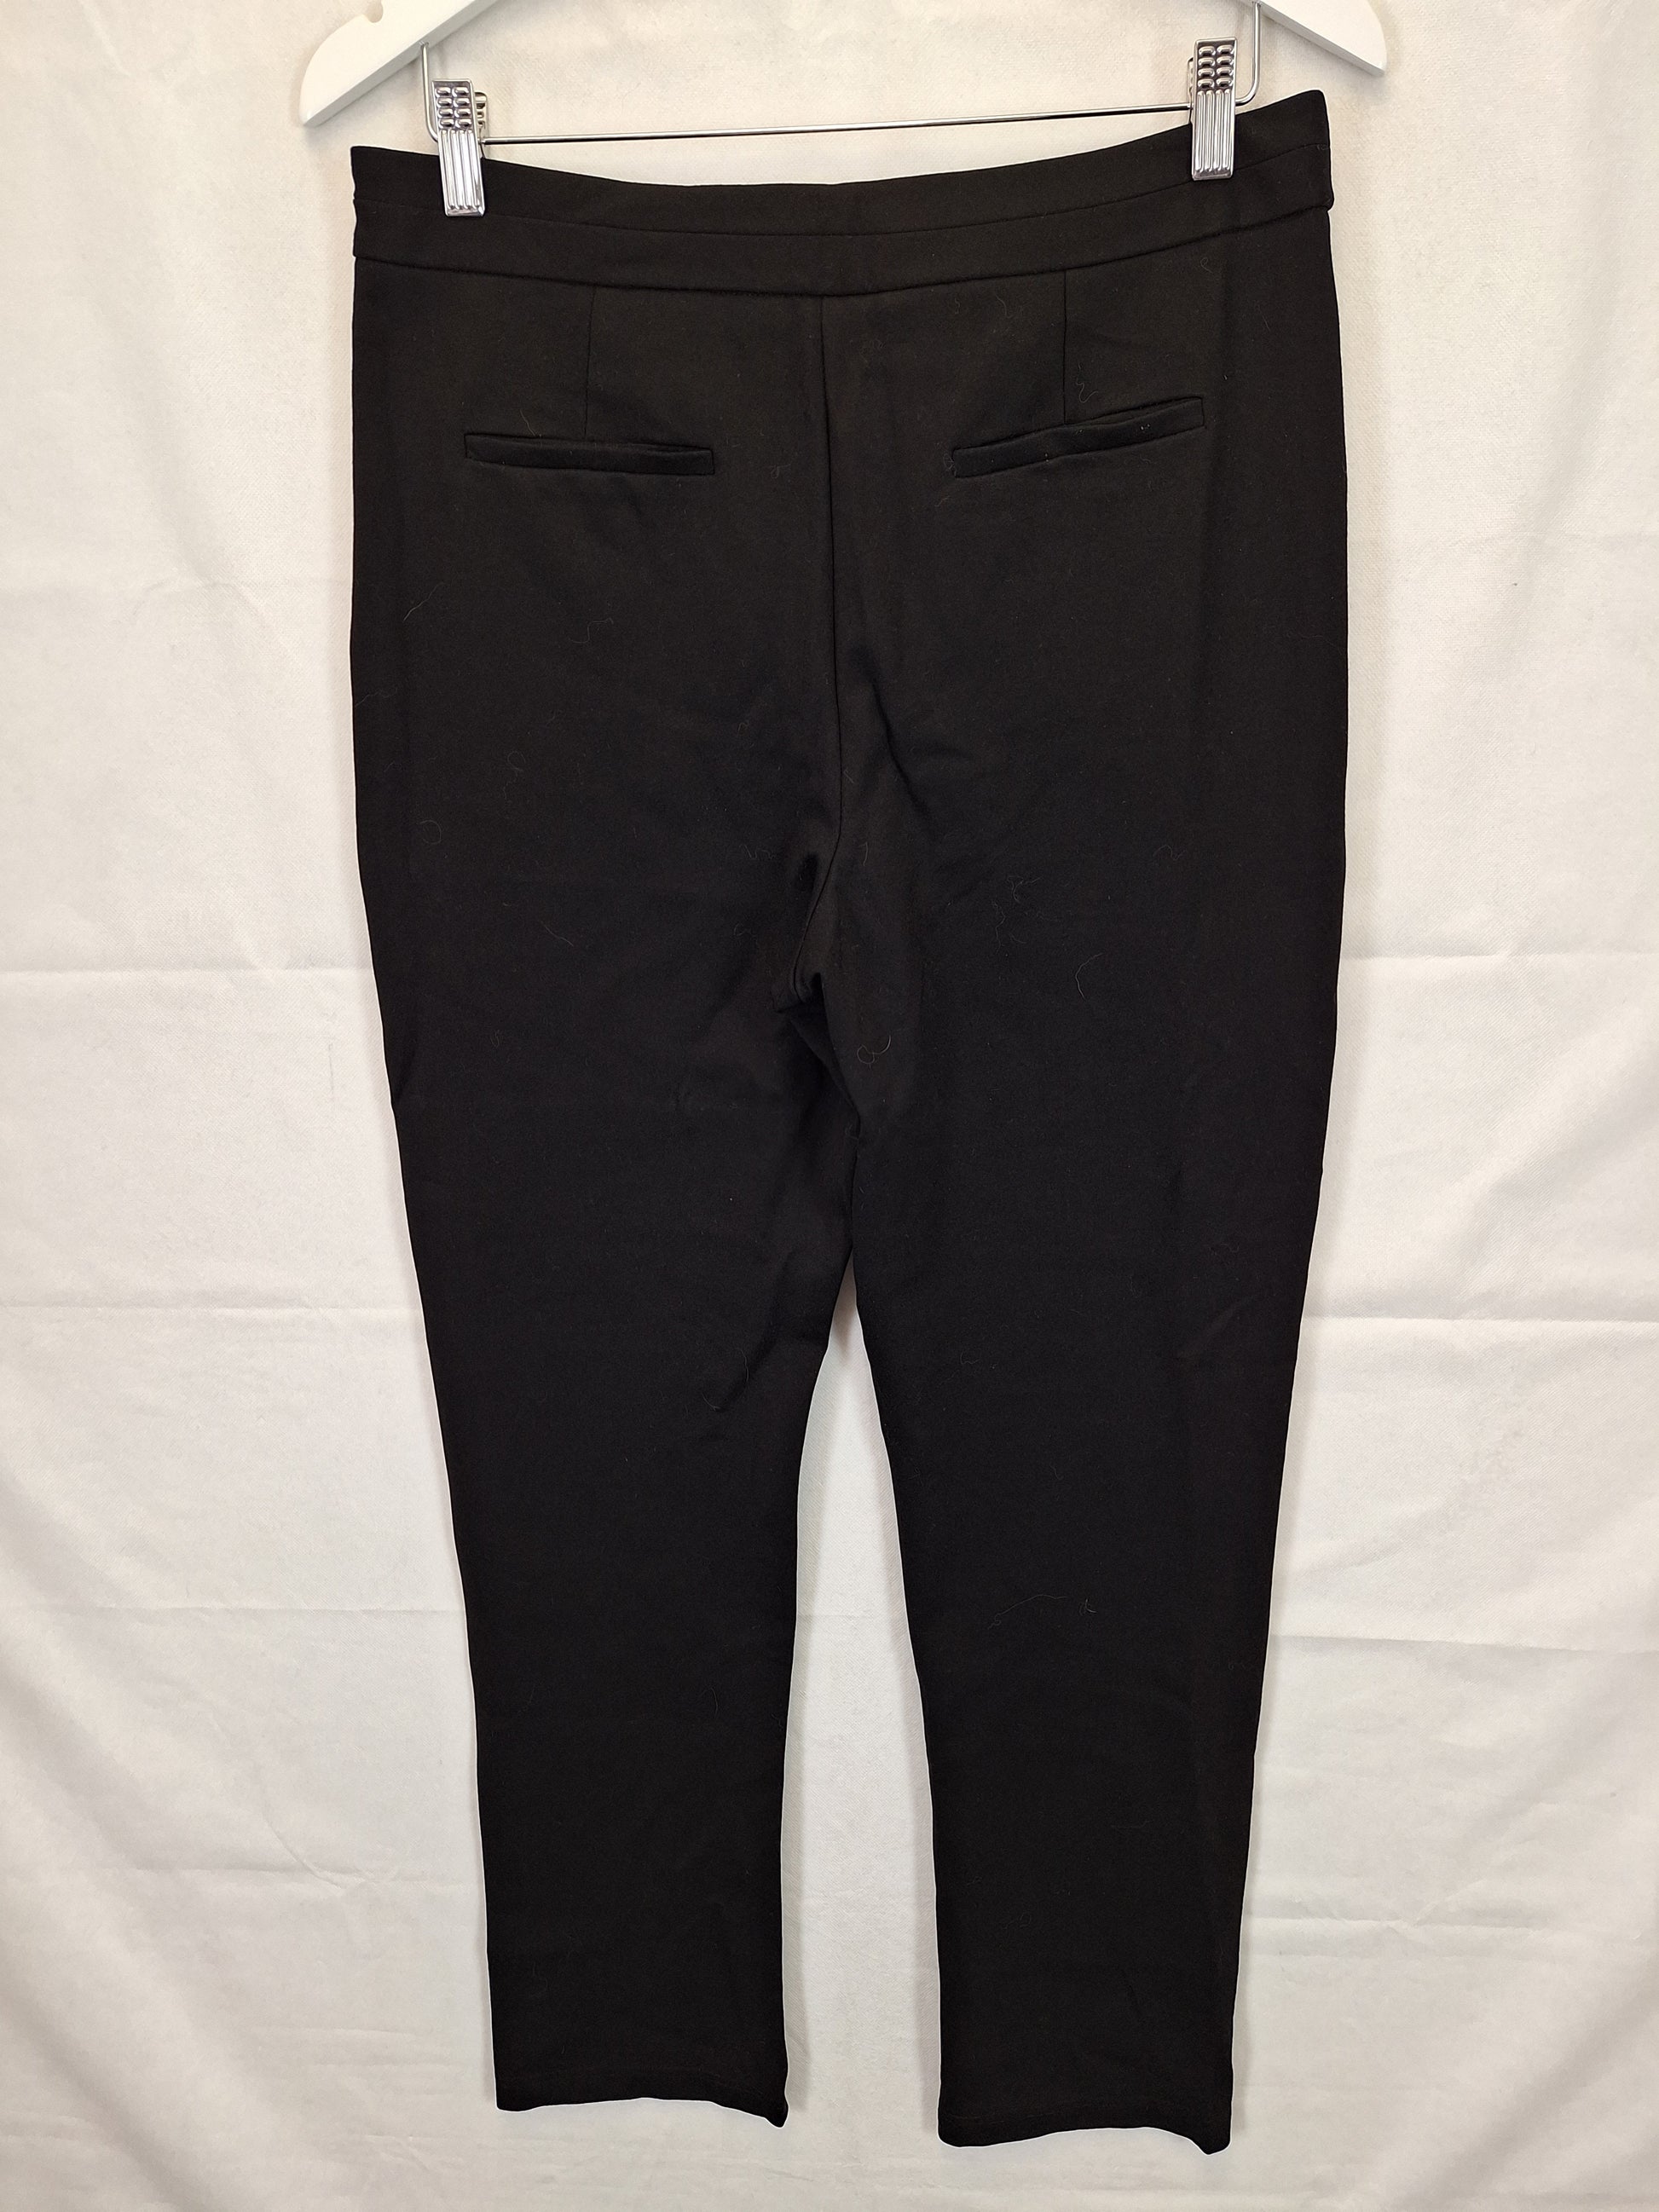 Review Staple Office Style Stretch Pants Size 12 – SwapUp